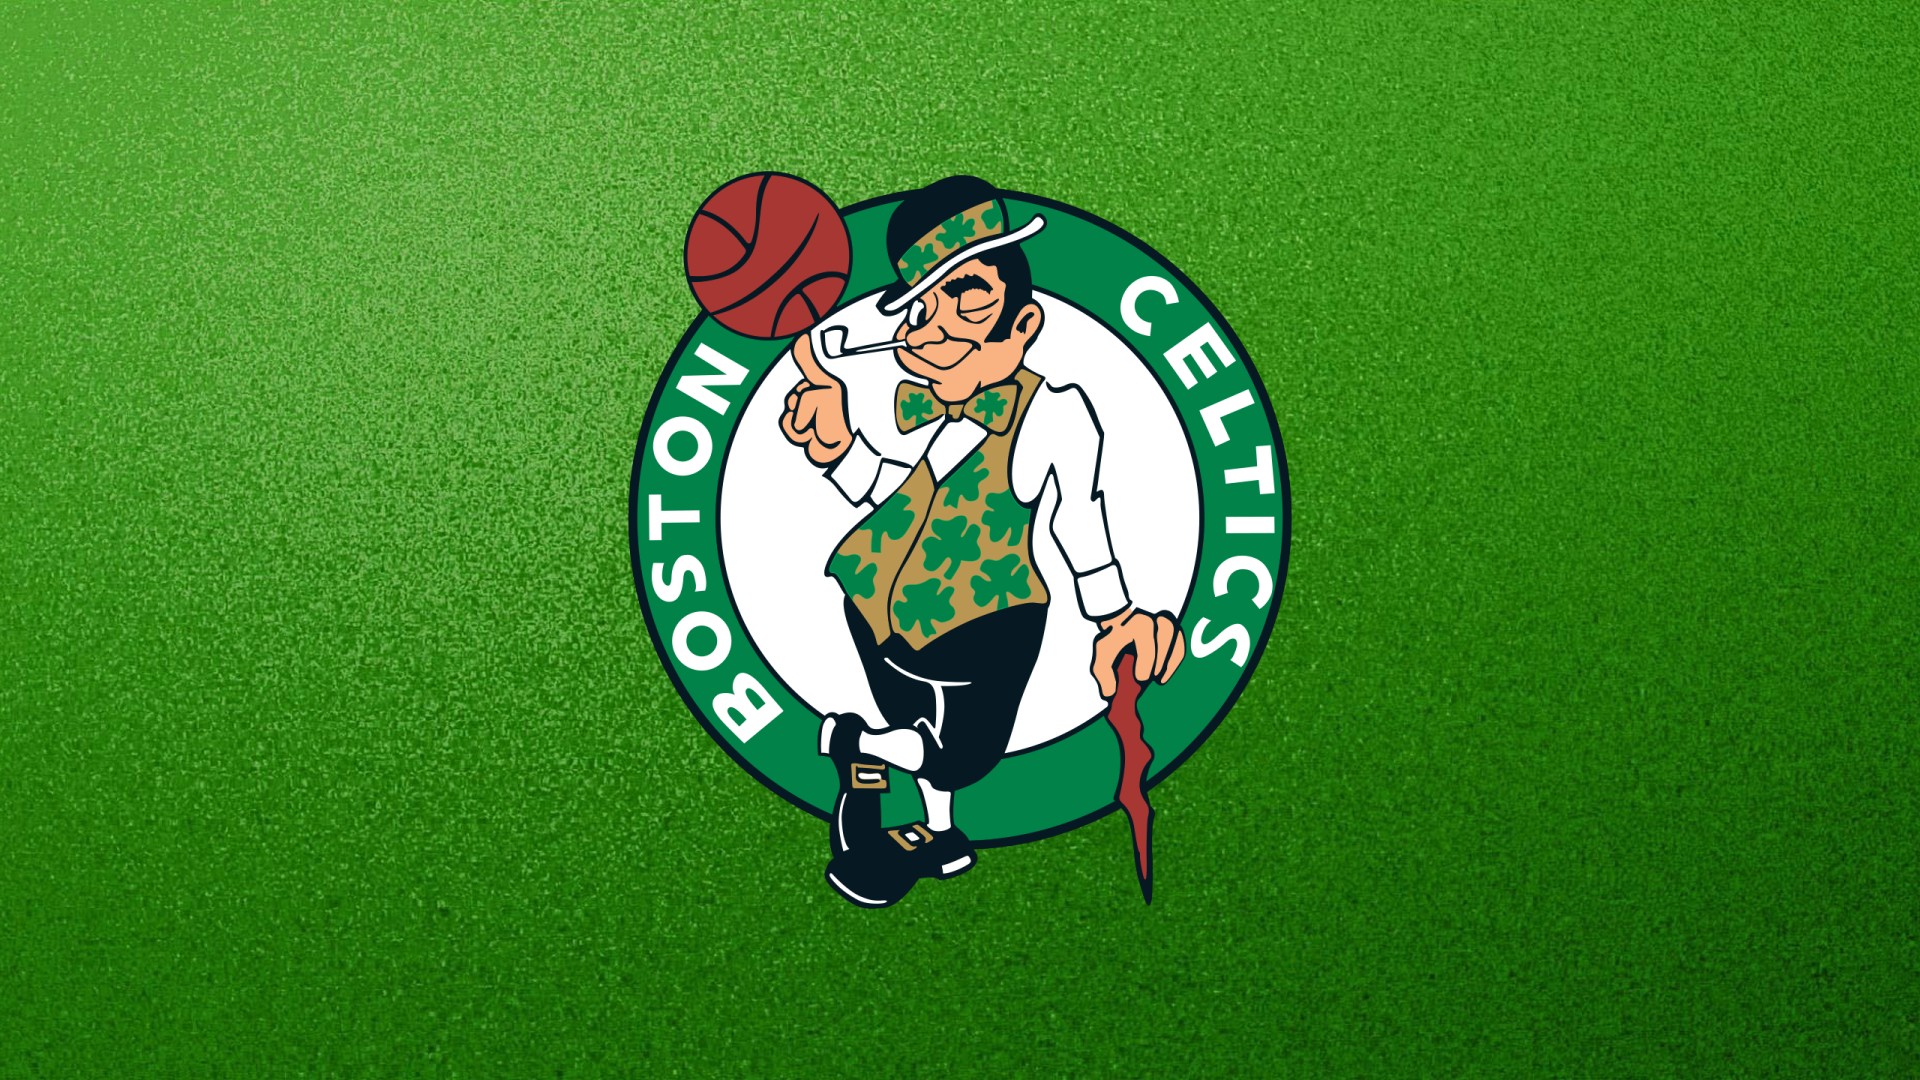 Boston Celtics Wallpaper For Mac Backgrounds with image dimensions 1920x1080 pixel. You can make this wallpaper for your Desktop Computer Backgrounds, Windows or Mac Screensavers, iPhone Lock screen, Tablet or Android and another Mobile Phone device